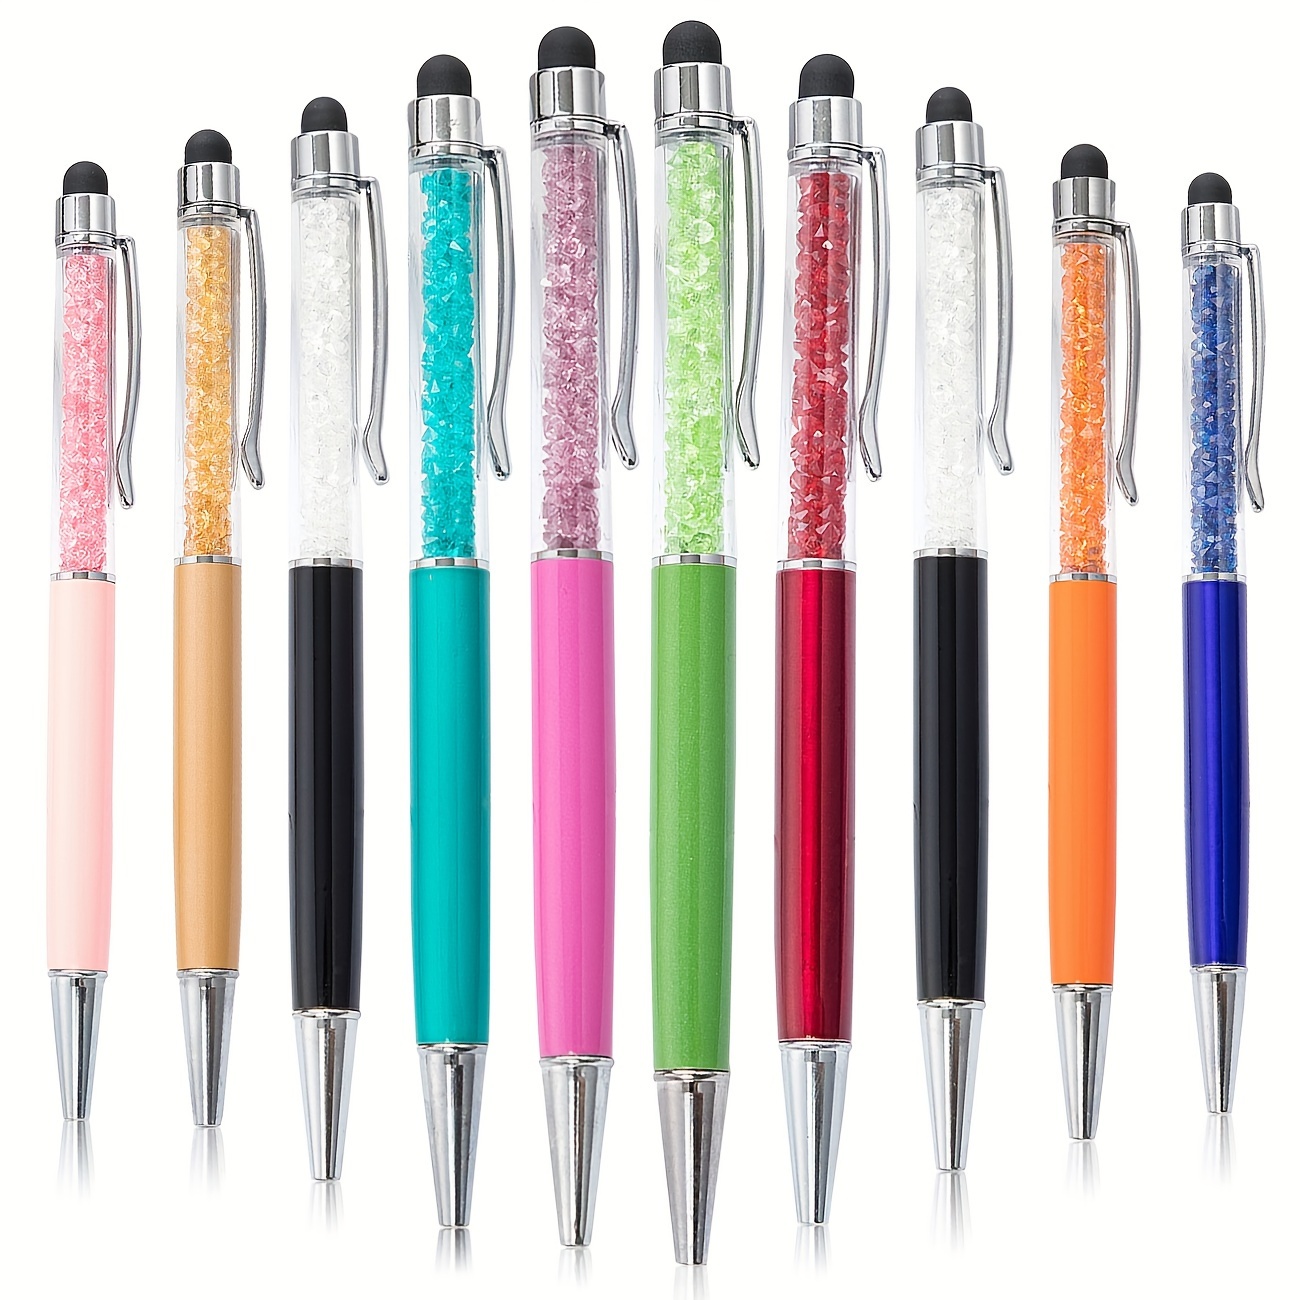 

10pcs/set Beautifully Crystal Ballpoint Pen Fashion Creative Stylus Touch Pen For Writing Stationery Office & School Customized Logo Gift